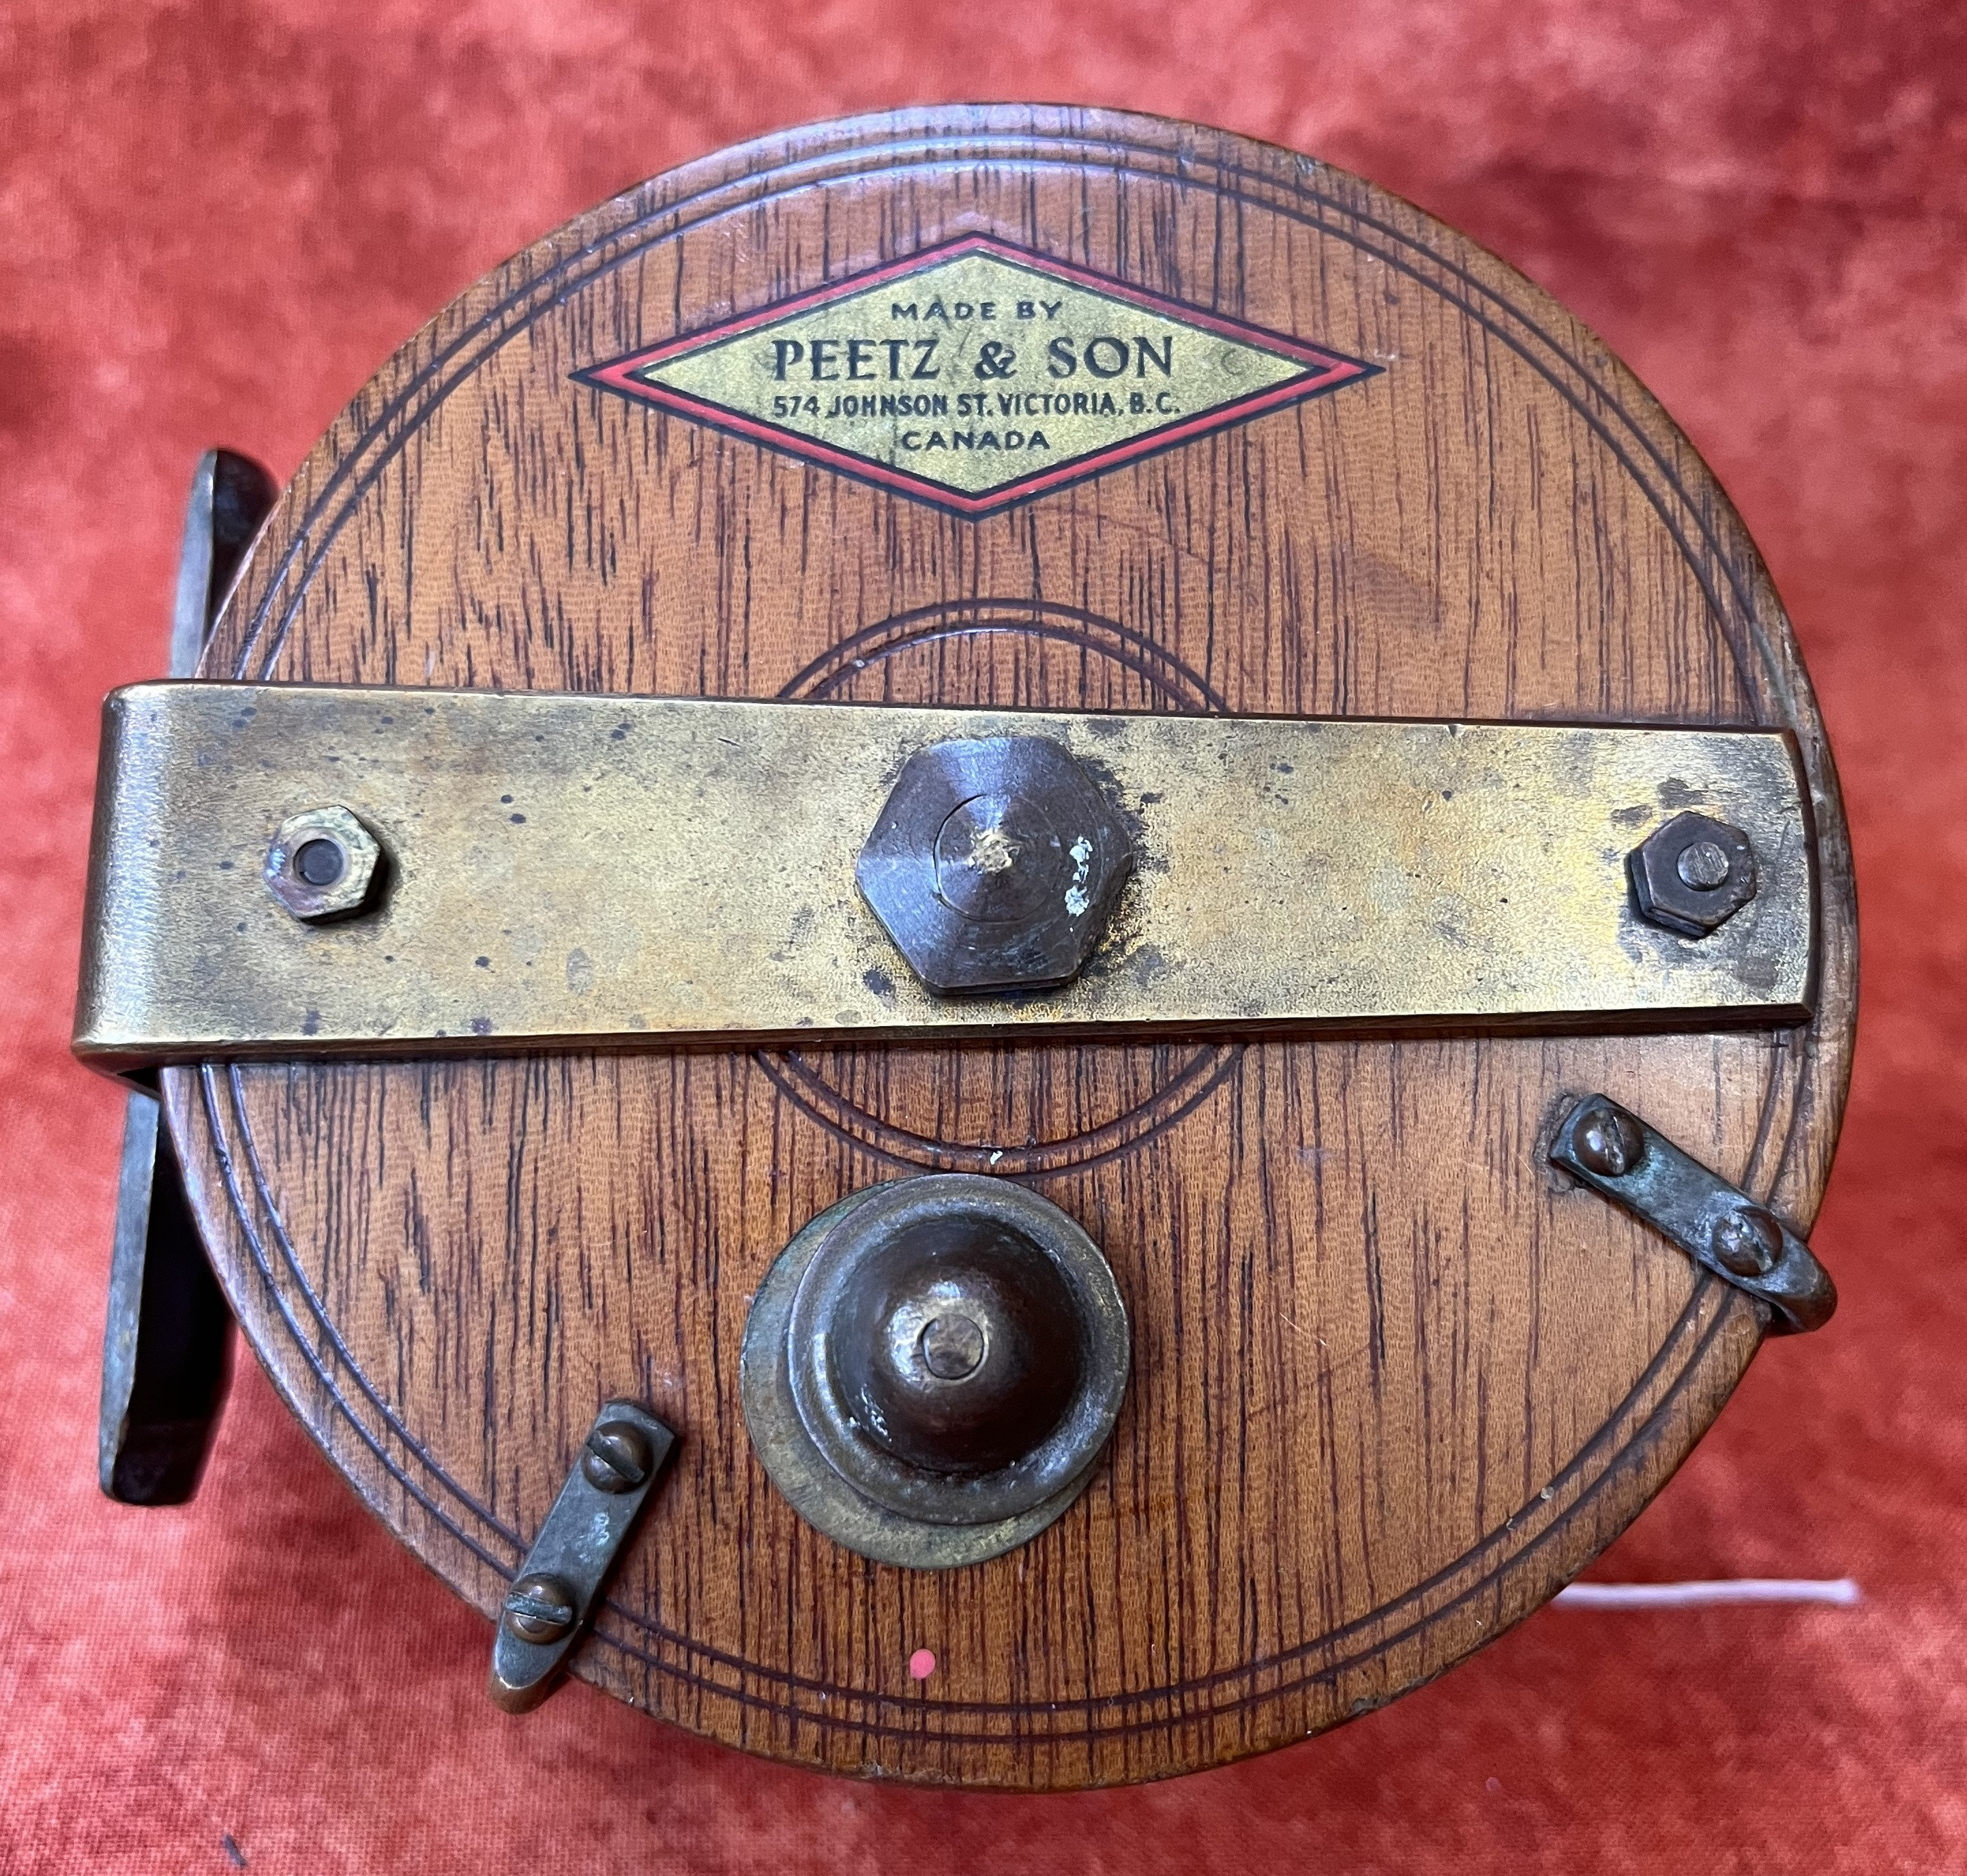 4” Peetz trolling fishing reel. Mahogany wood reel. Early antique wooden  fishing reel. Made in Victoria BC Canada. Peetz and Son. Dad’s gift